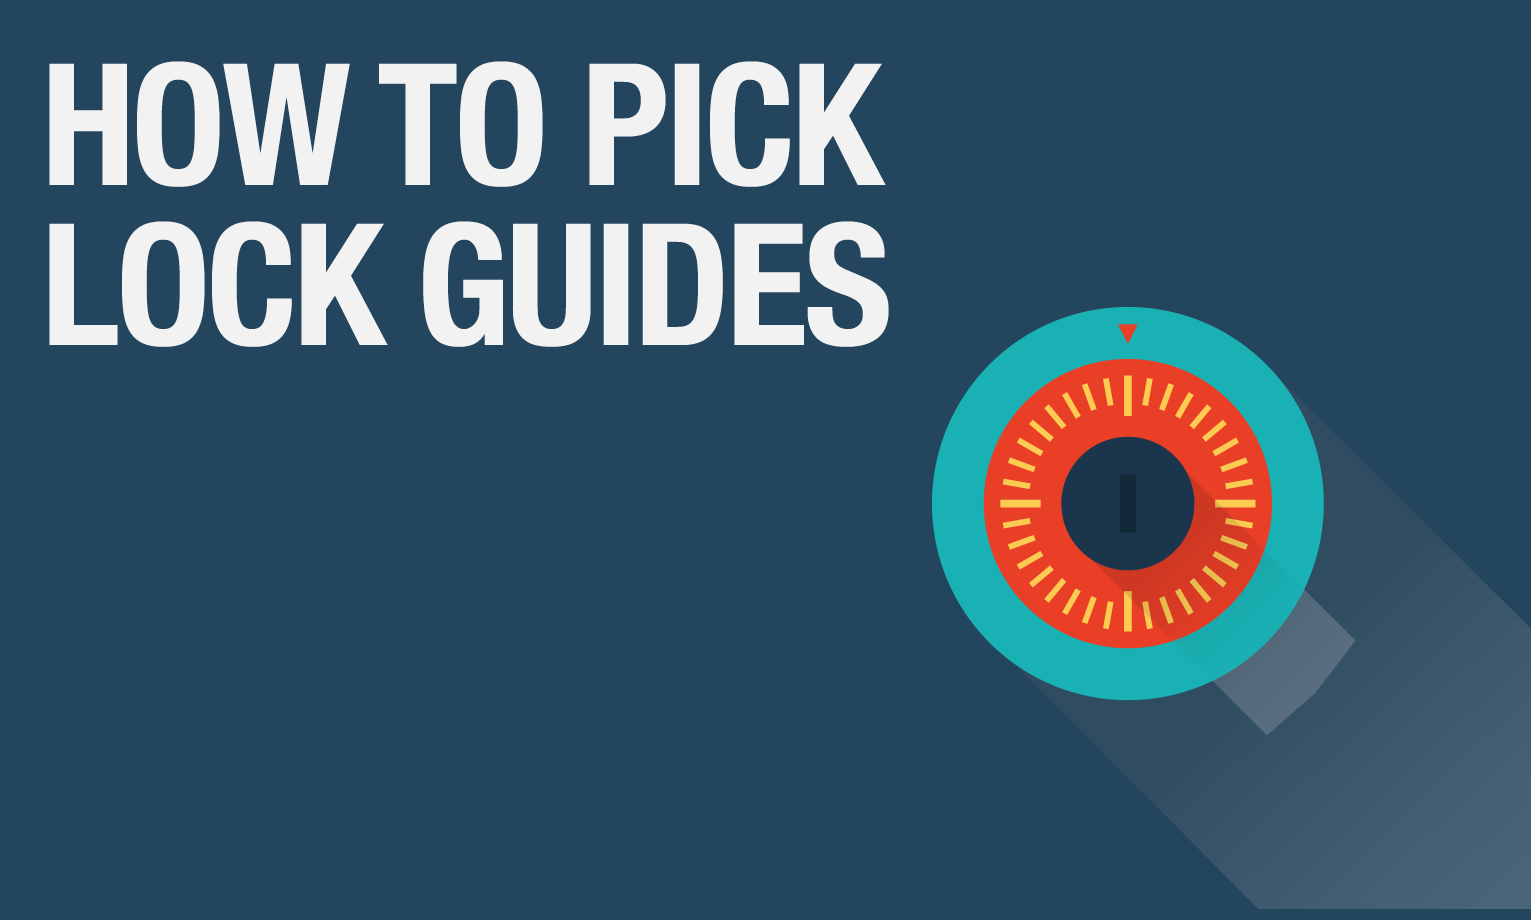 how to pick lock guides image 1